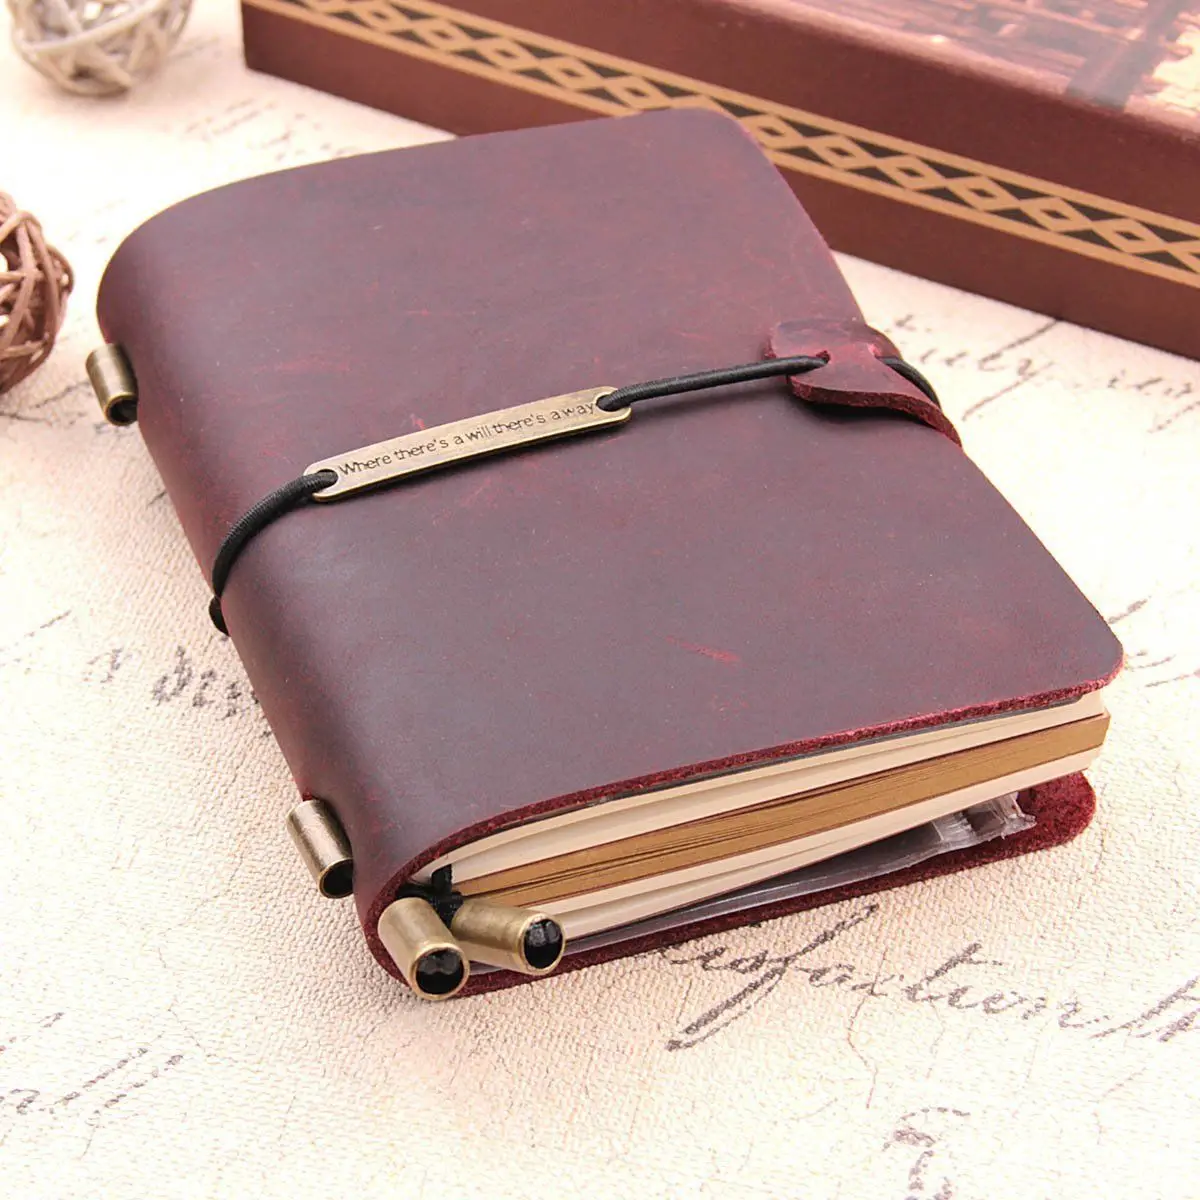 Vintage Leather Notebook Handmade Retro Travel Writing Journal Diary Unlined